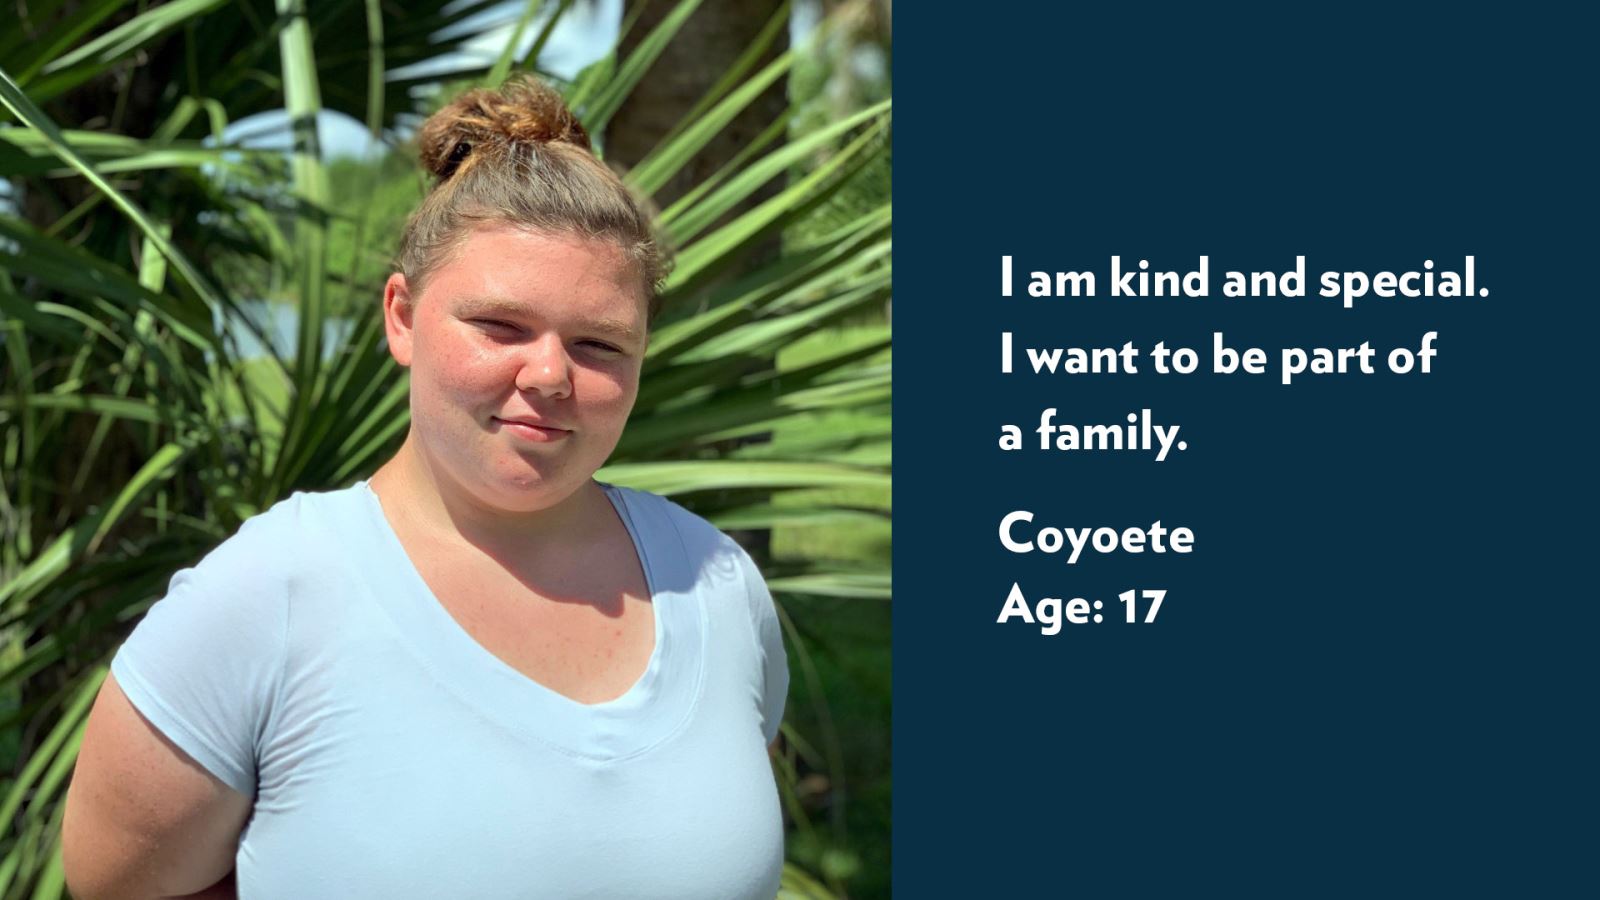 Coyoete, age 17. I am kind and special. I want to be part of a family.